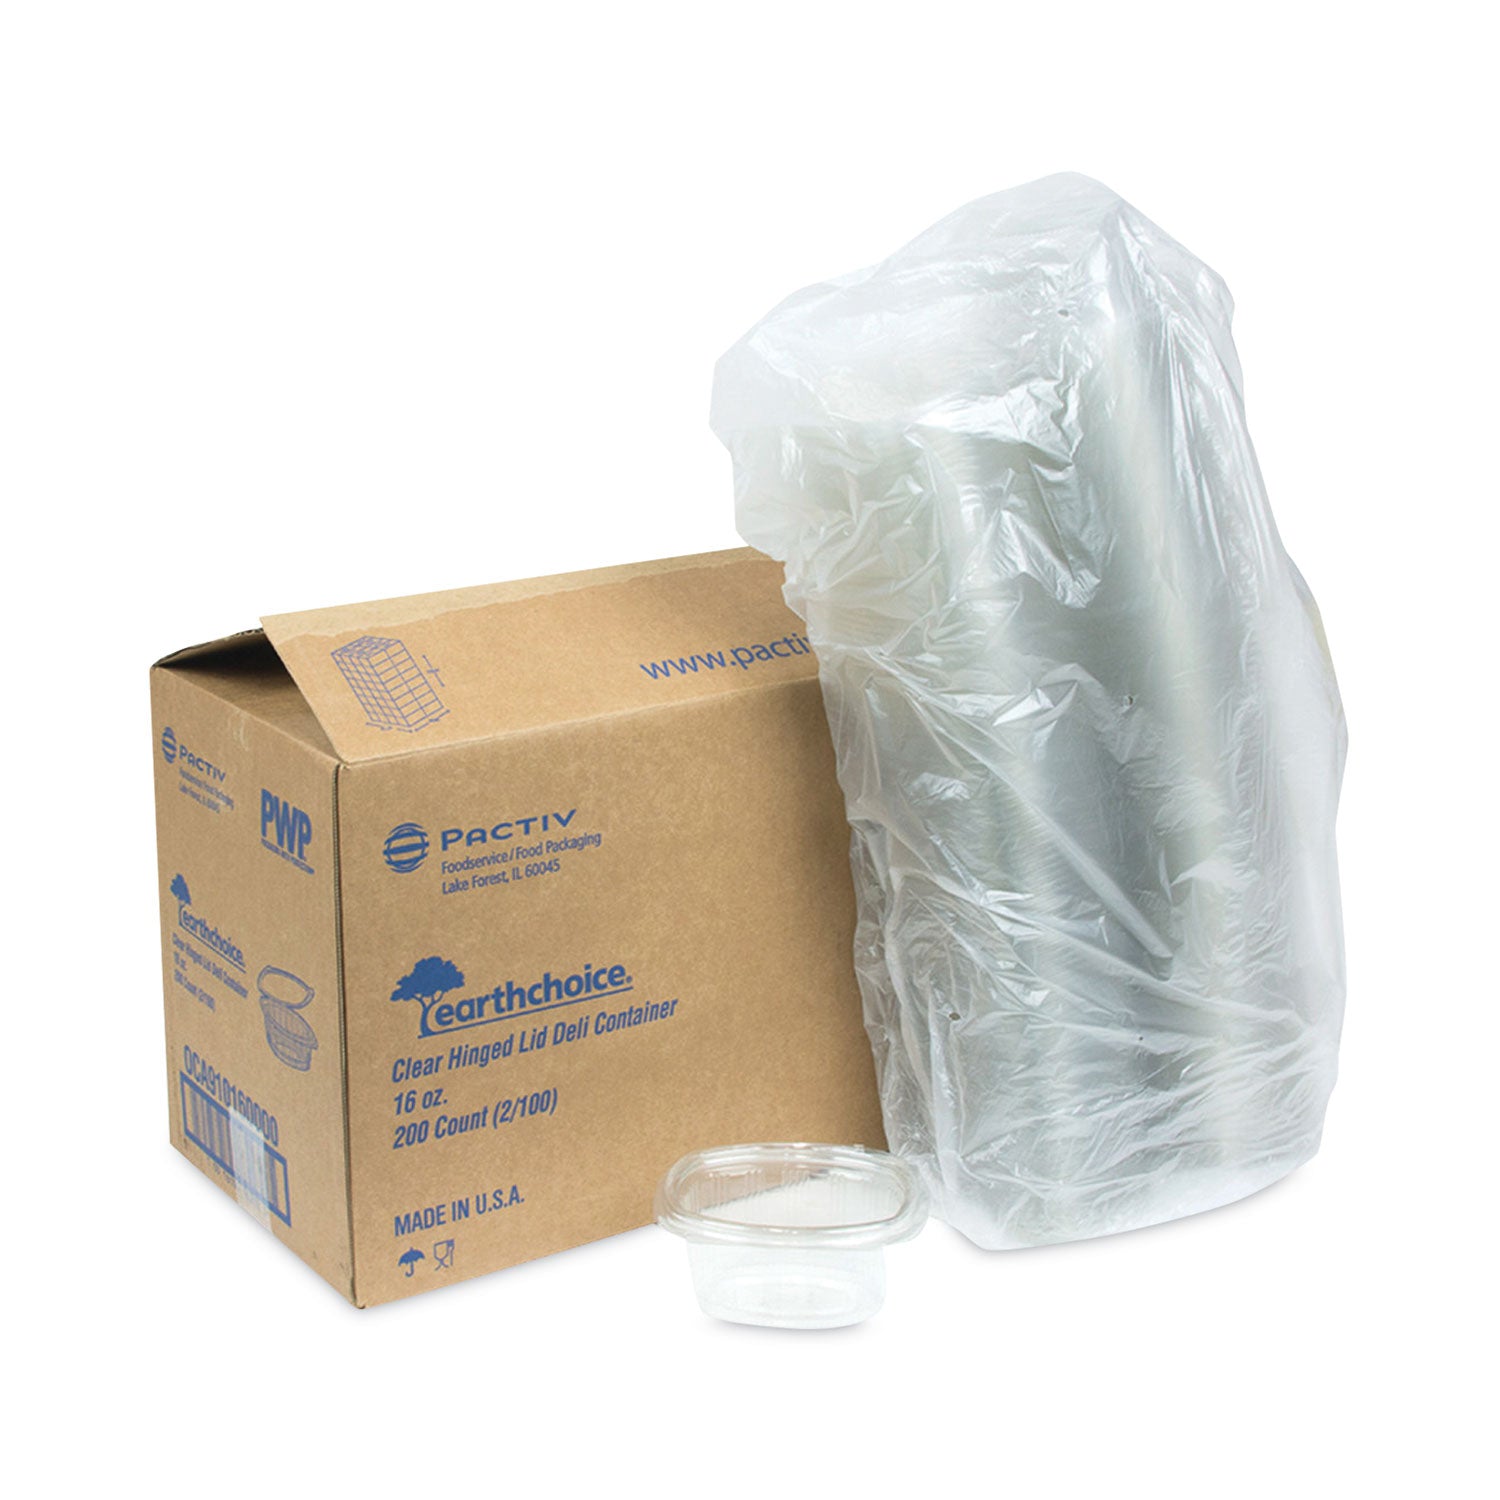 earthchoice-recycled-pet-hinged-container-16-oz-492-x-587-x-248-clear-plastic-200-carton_pct0ca910160000 - 4